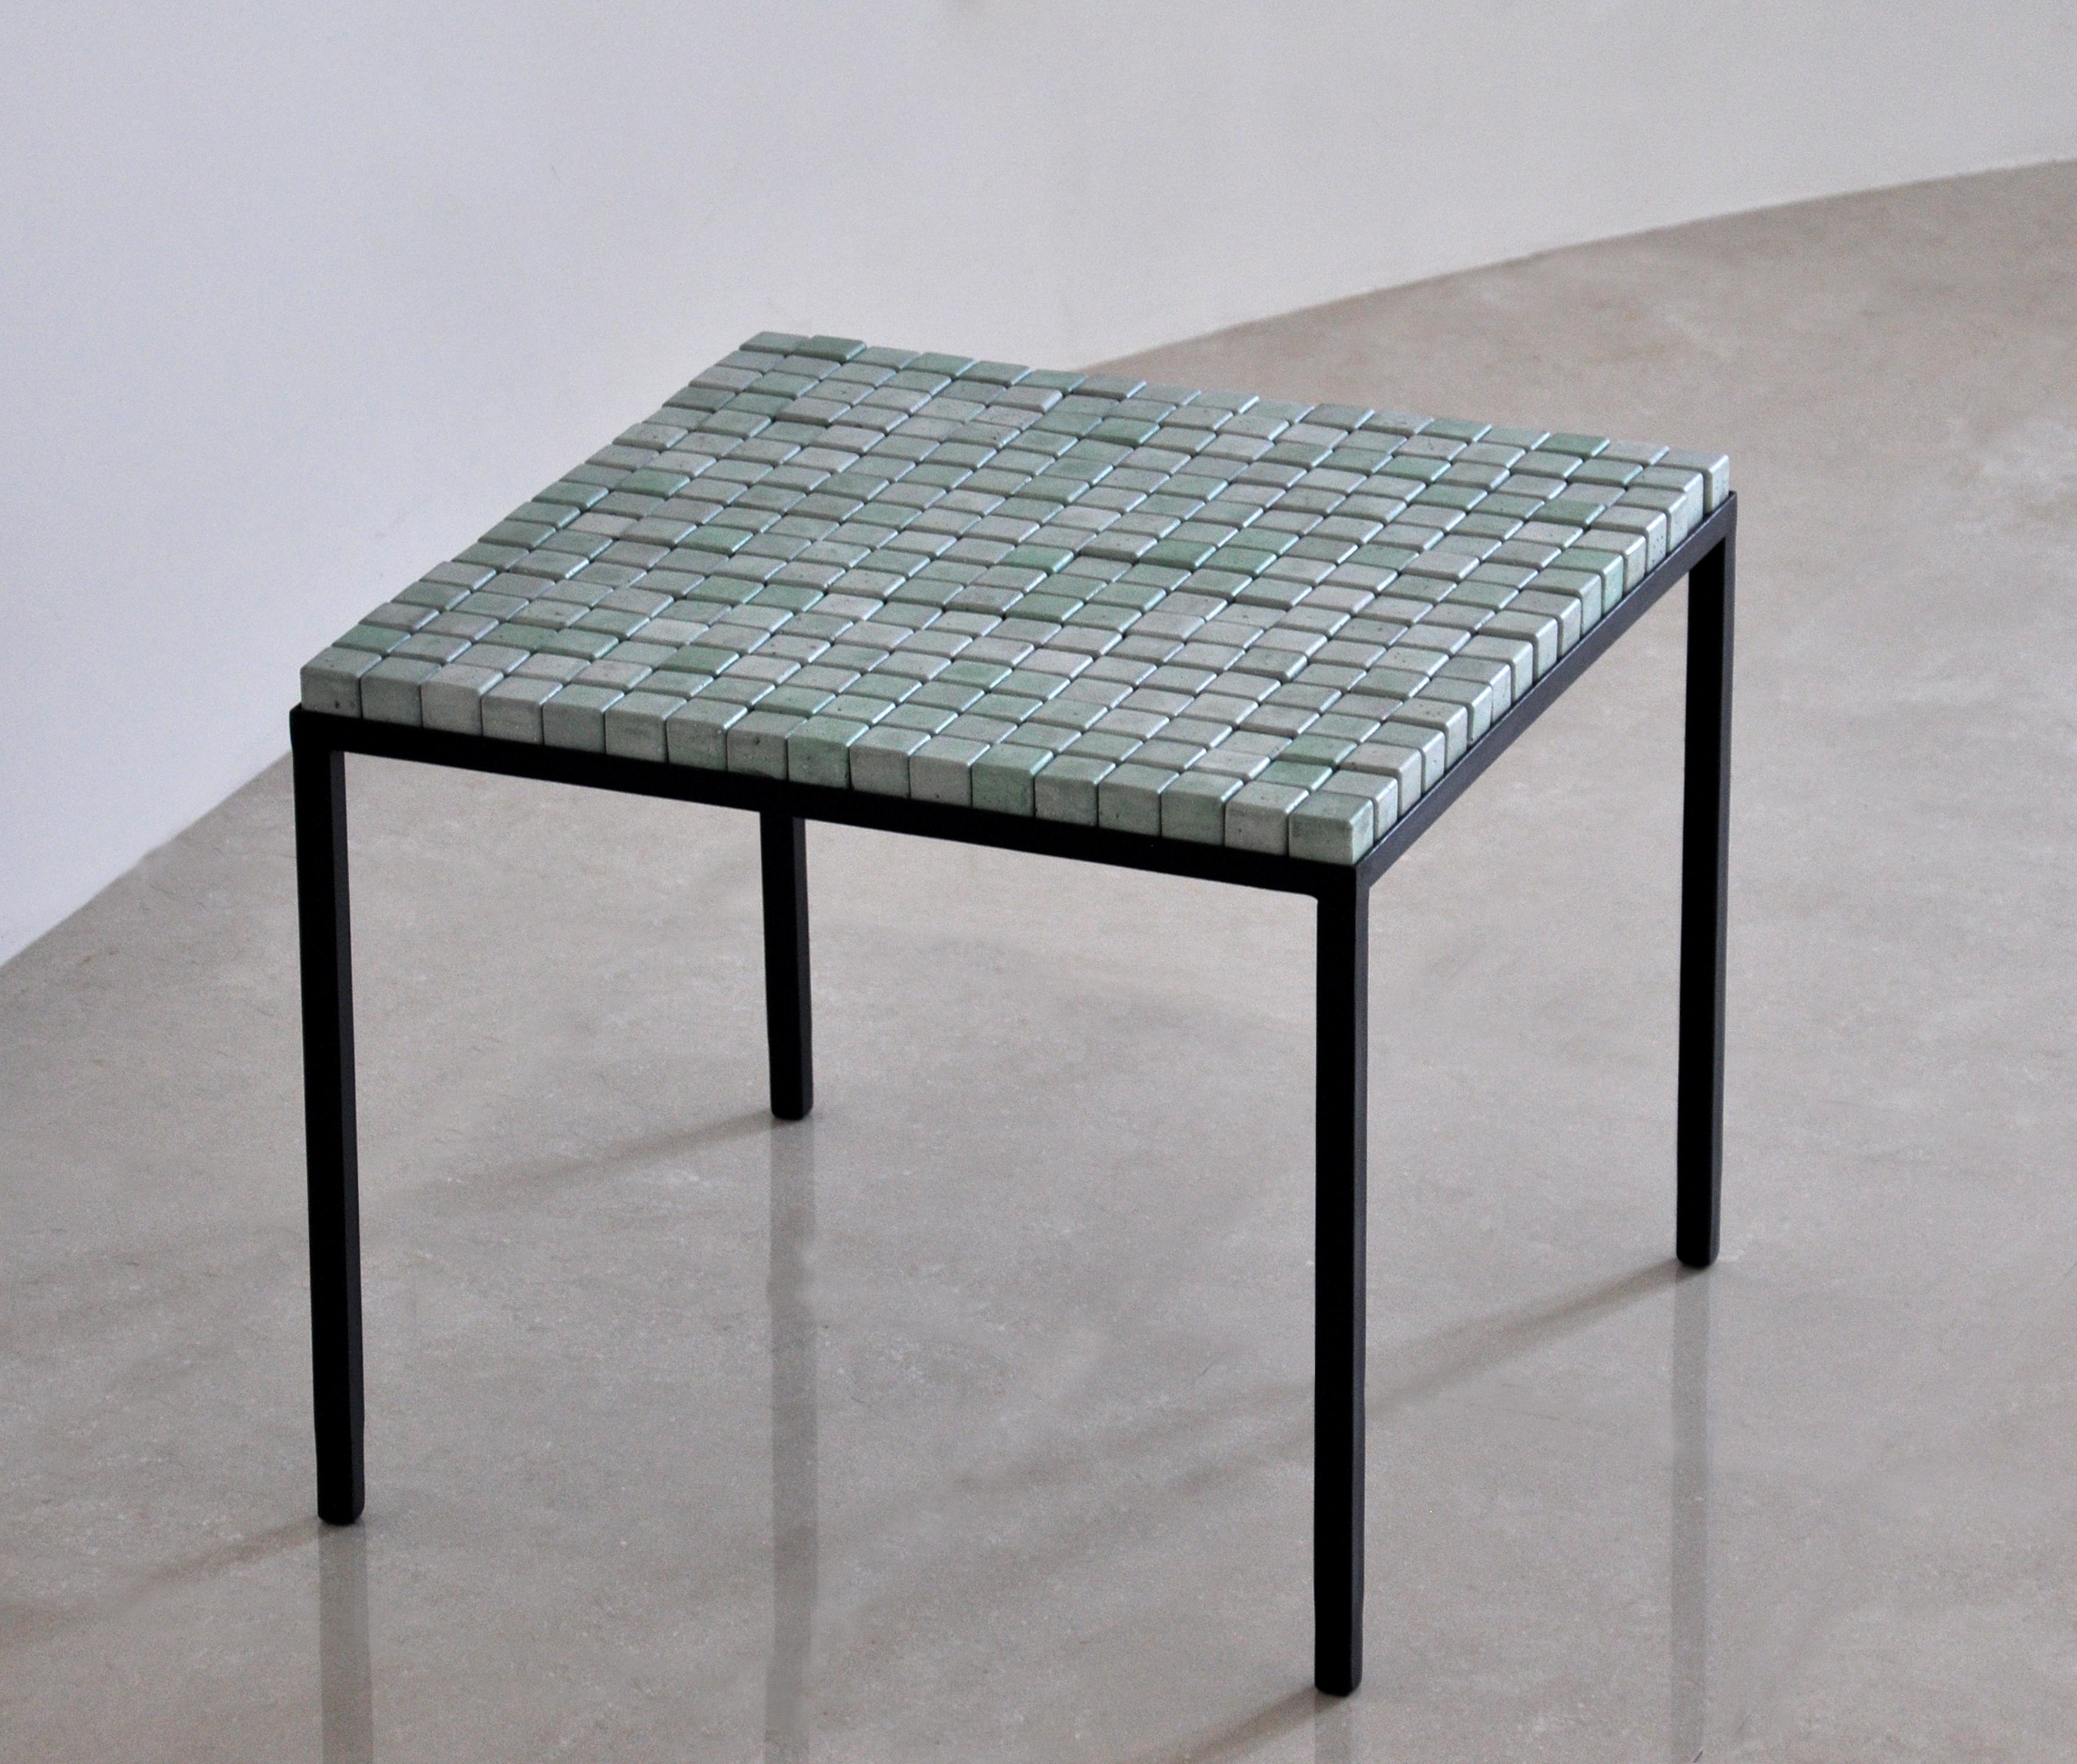 Green (Turquoise) Concrete Cubes Table cc mint by Miriam Loellmann 
Edition of 10. 
Signed.
Materials: colored concrete, steel (hand painted), leather.
Dimensions: 46.5 x 56.5 x 56.5 cms
Weight: 22kg

Cubes are removable, each table-top is unique,